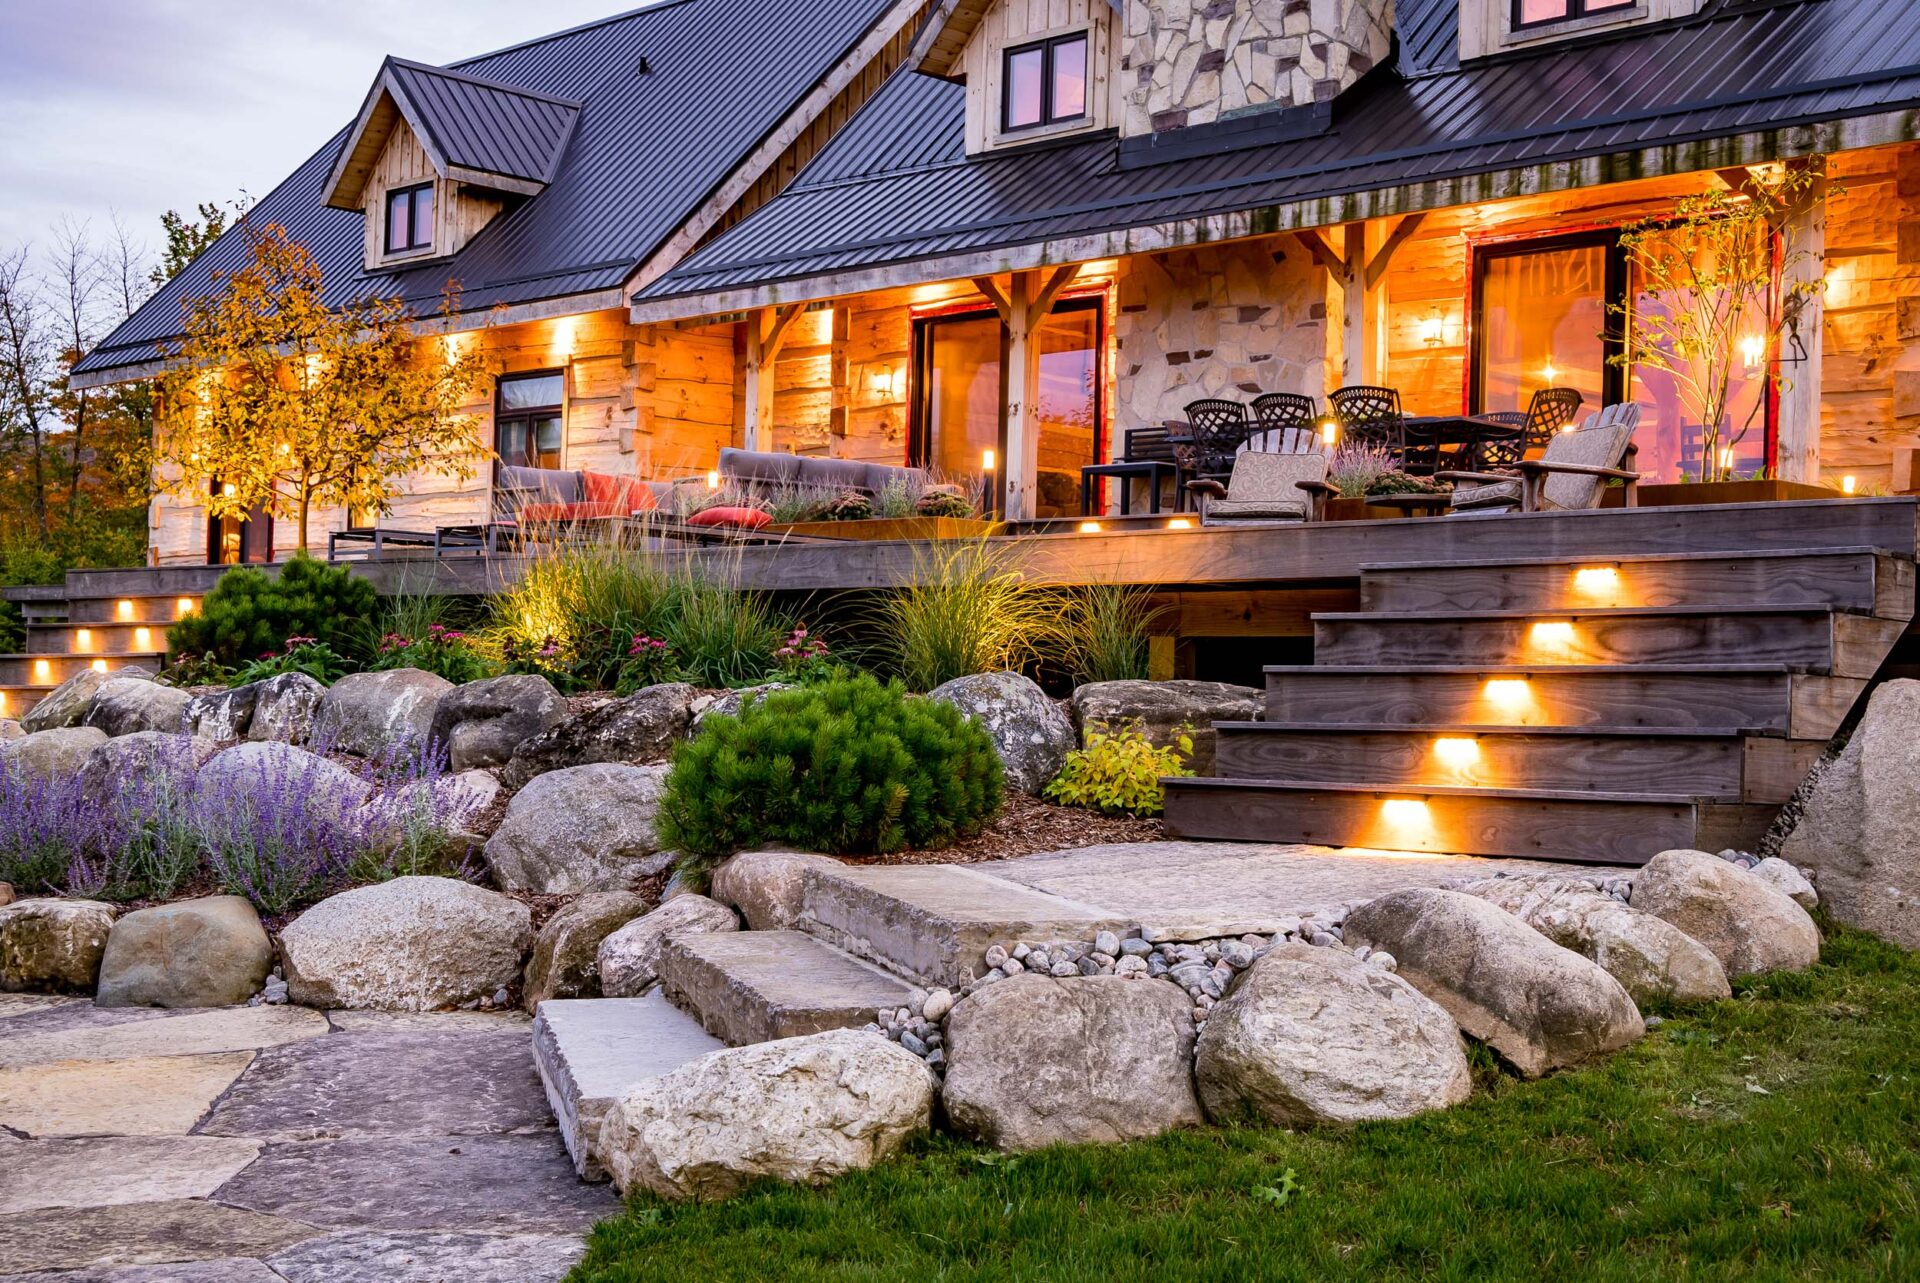 A rustic house with a lit porch, wooden steps with lights, and a landscaped garden with rocks and flowering plants at dusk.